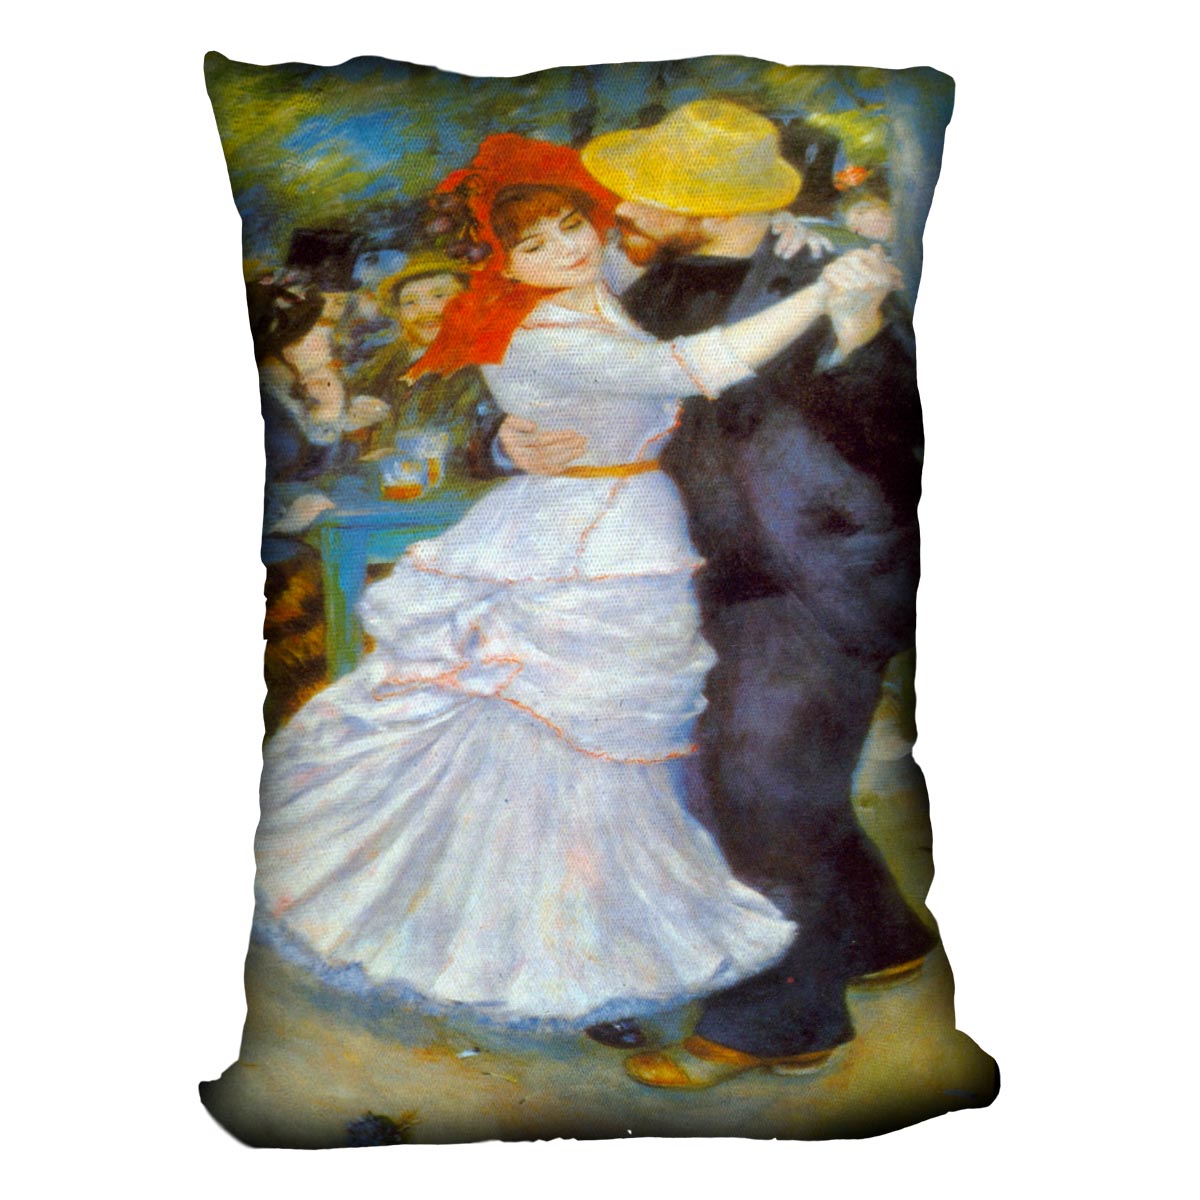 Dance at Bougival by Renoir Cushion